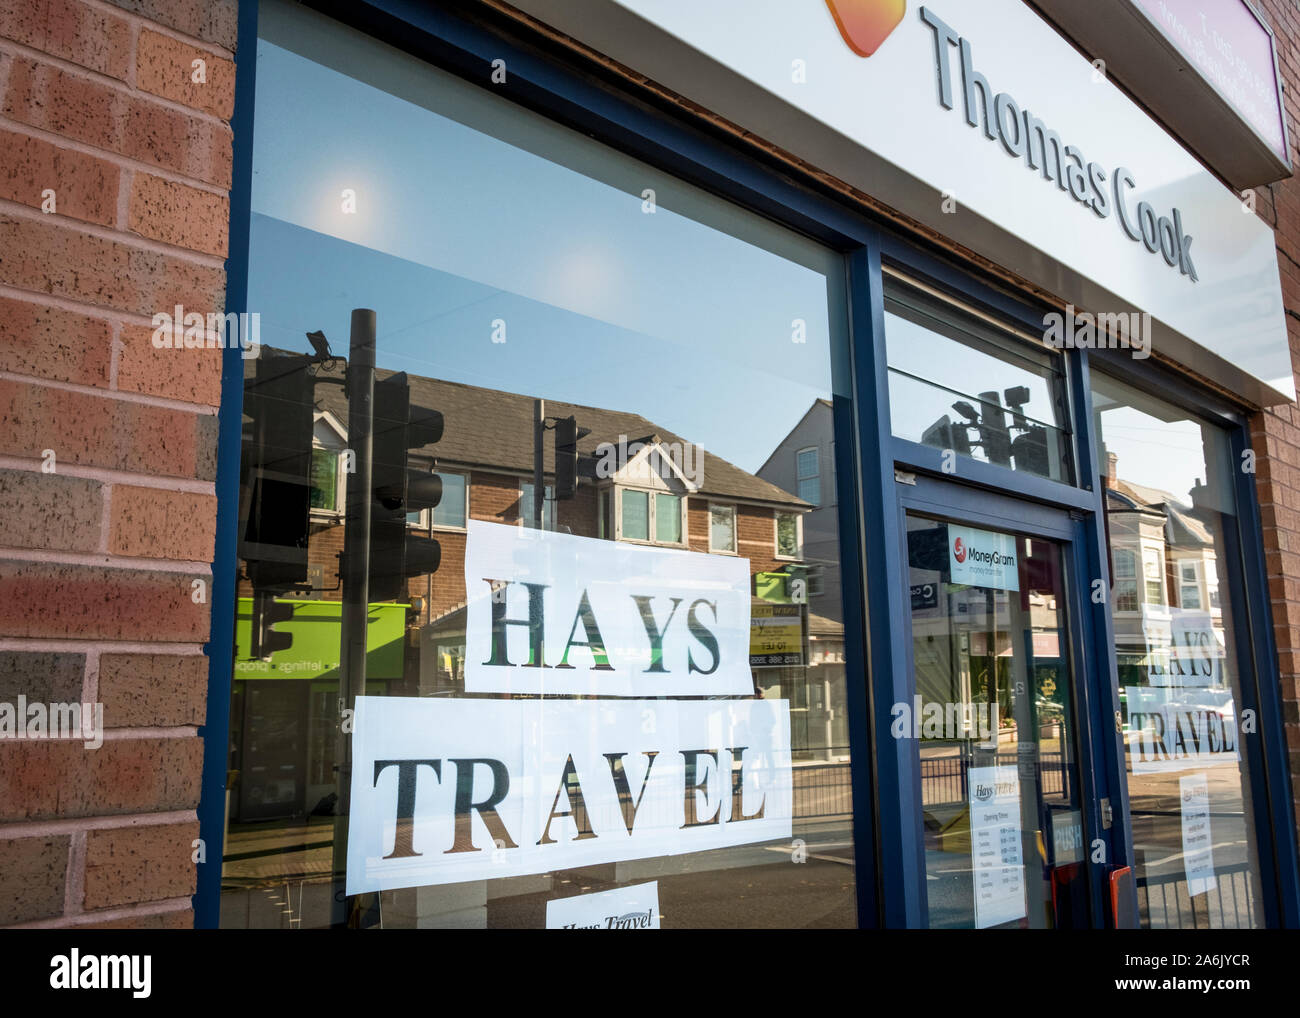 Hays Travel temporary sign in the window of an ex Thomas Cook travel agency shop, West Bridgford, Nottinghamshire, England, UK Stock Photo